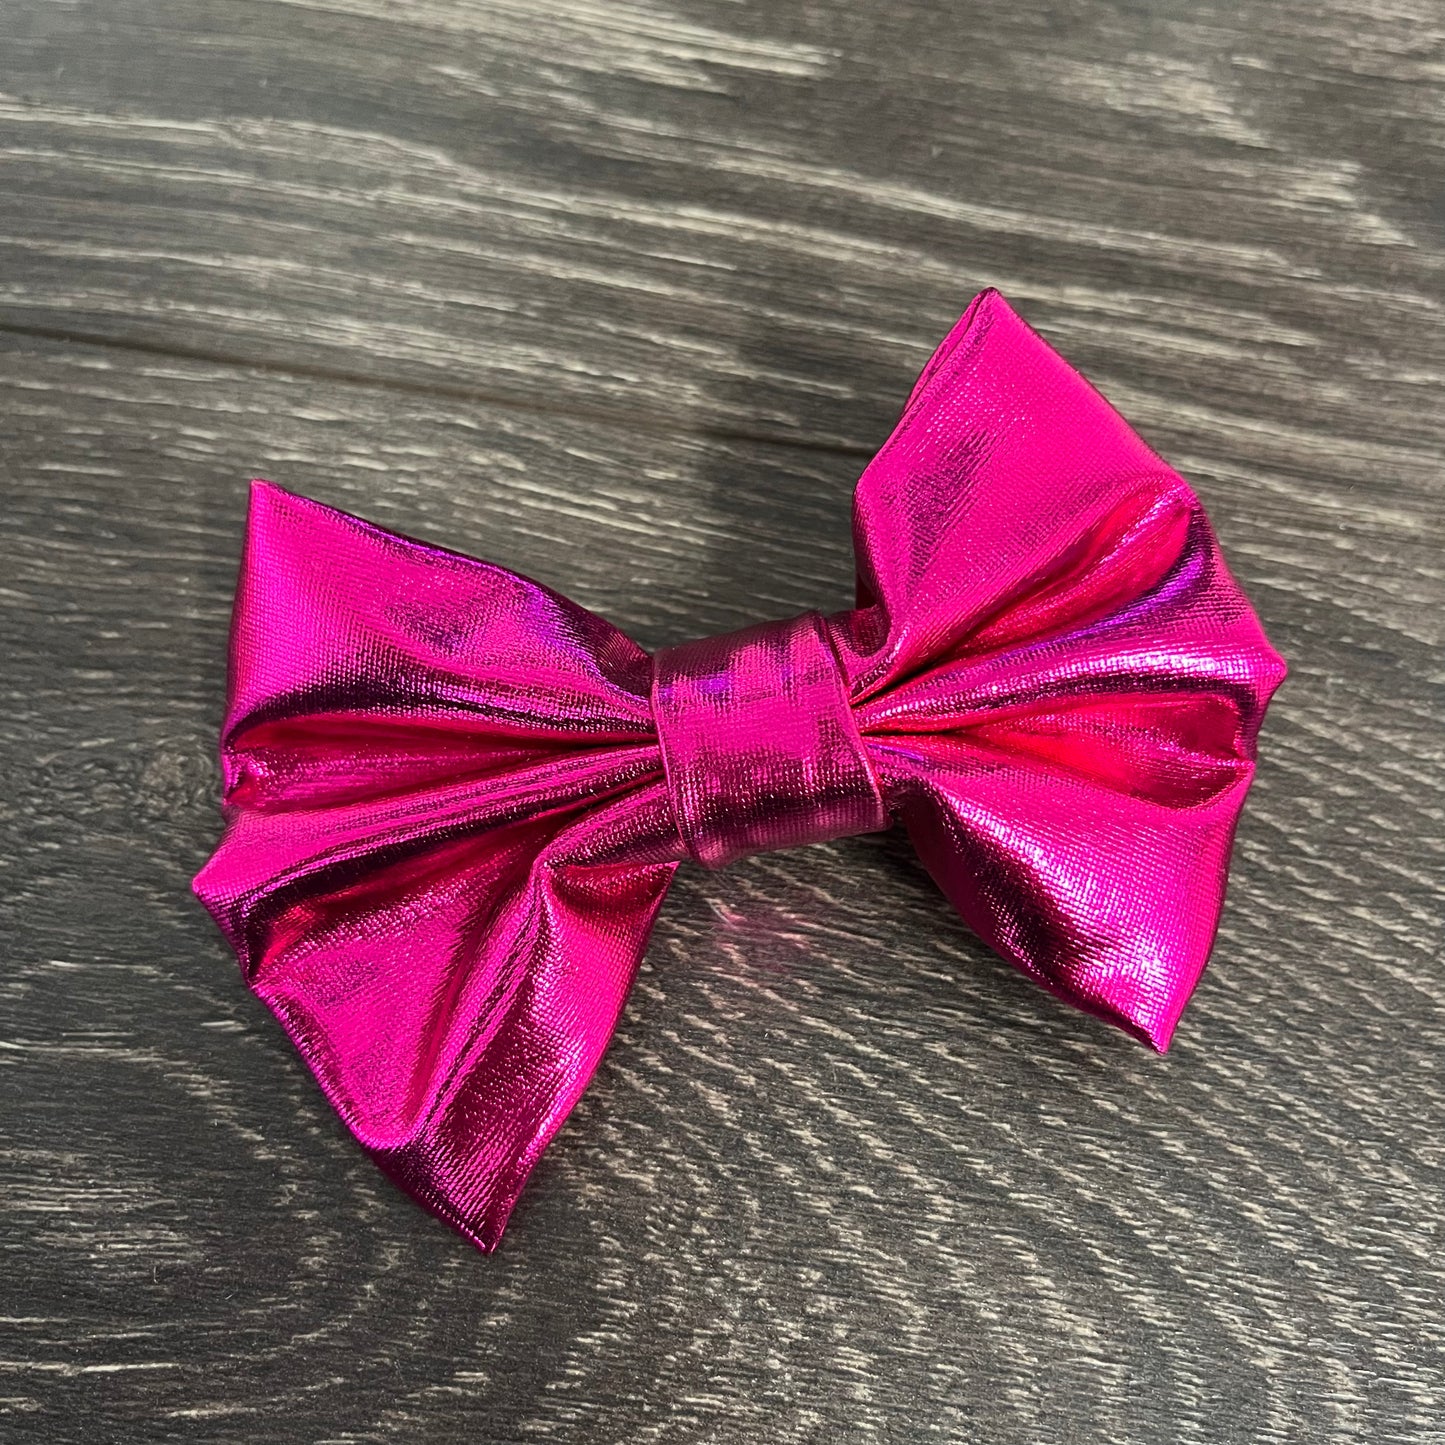 4" Leather Bow - Pink